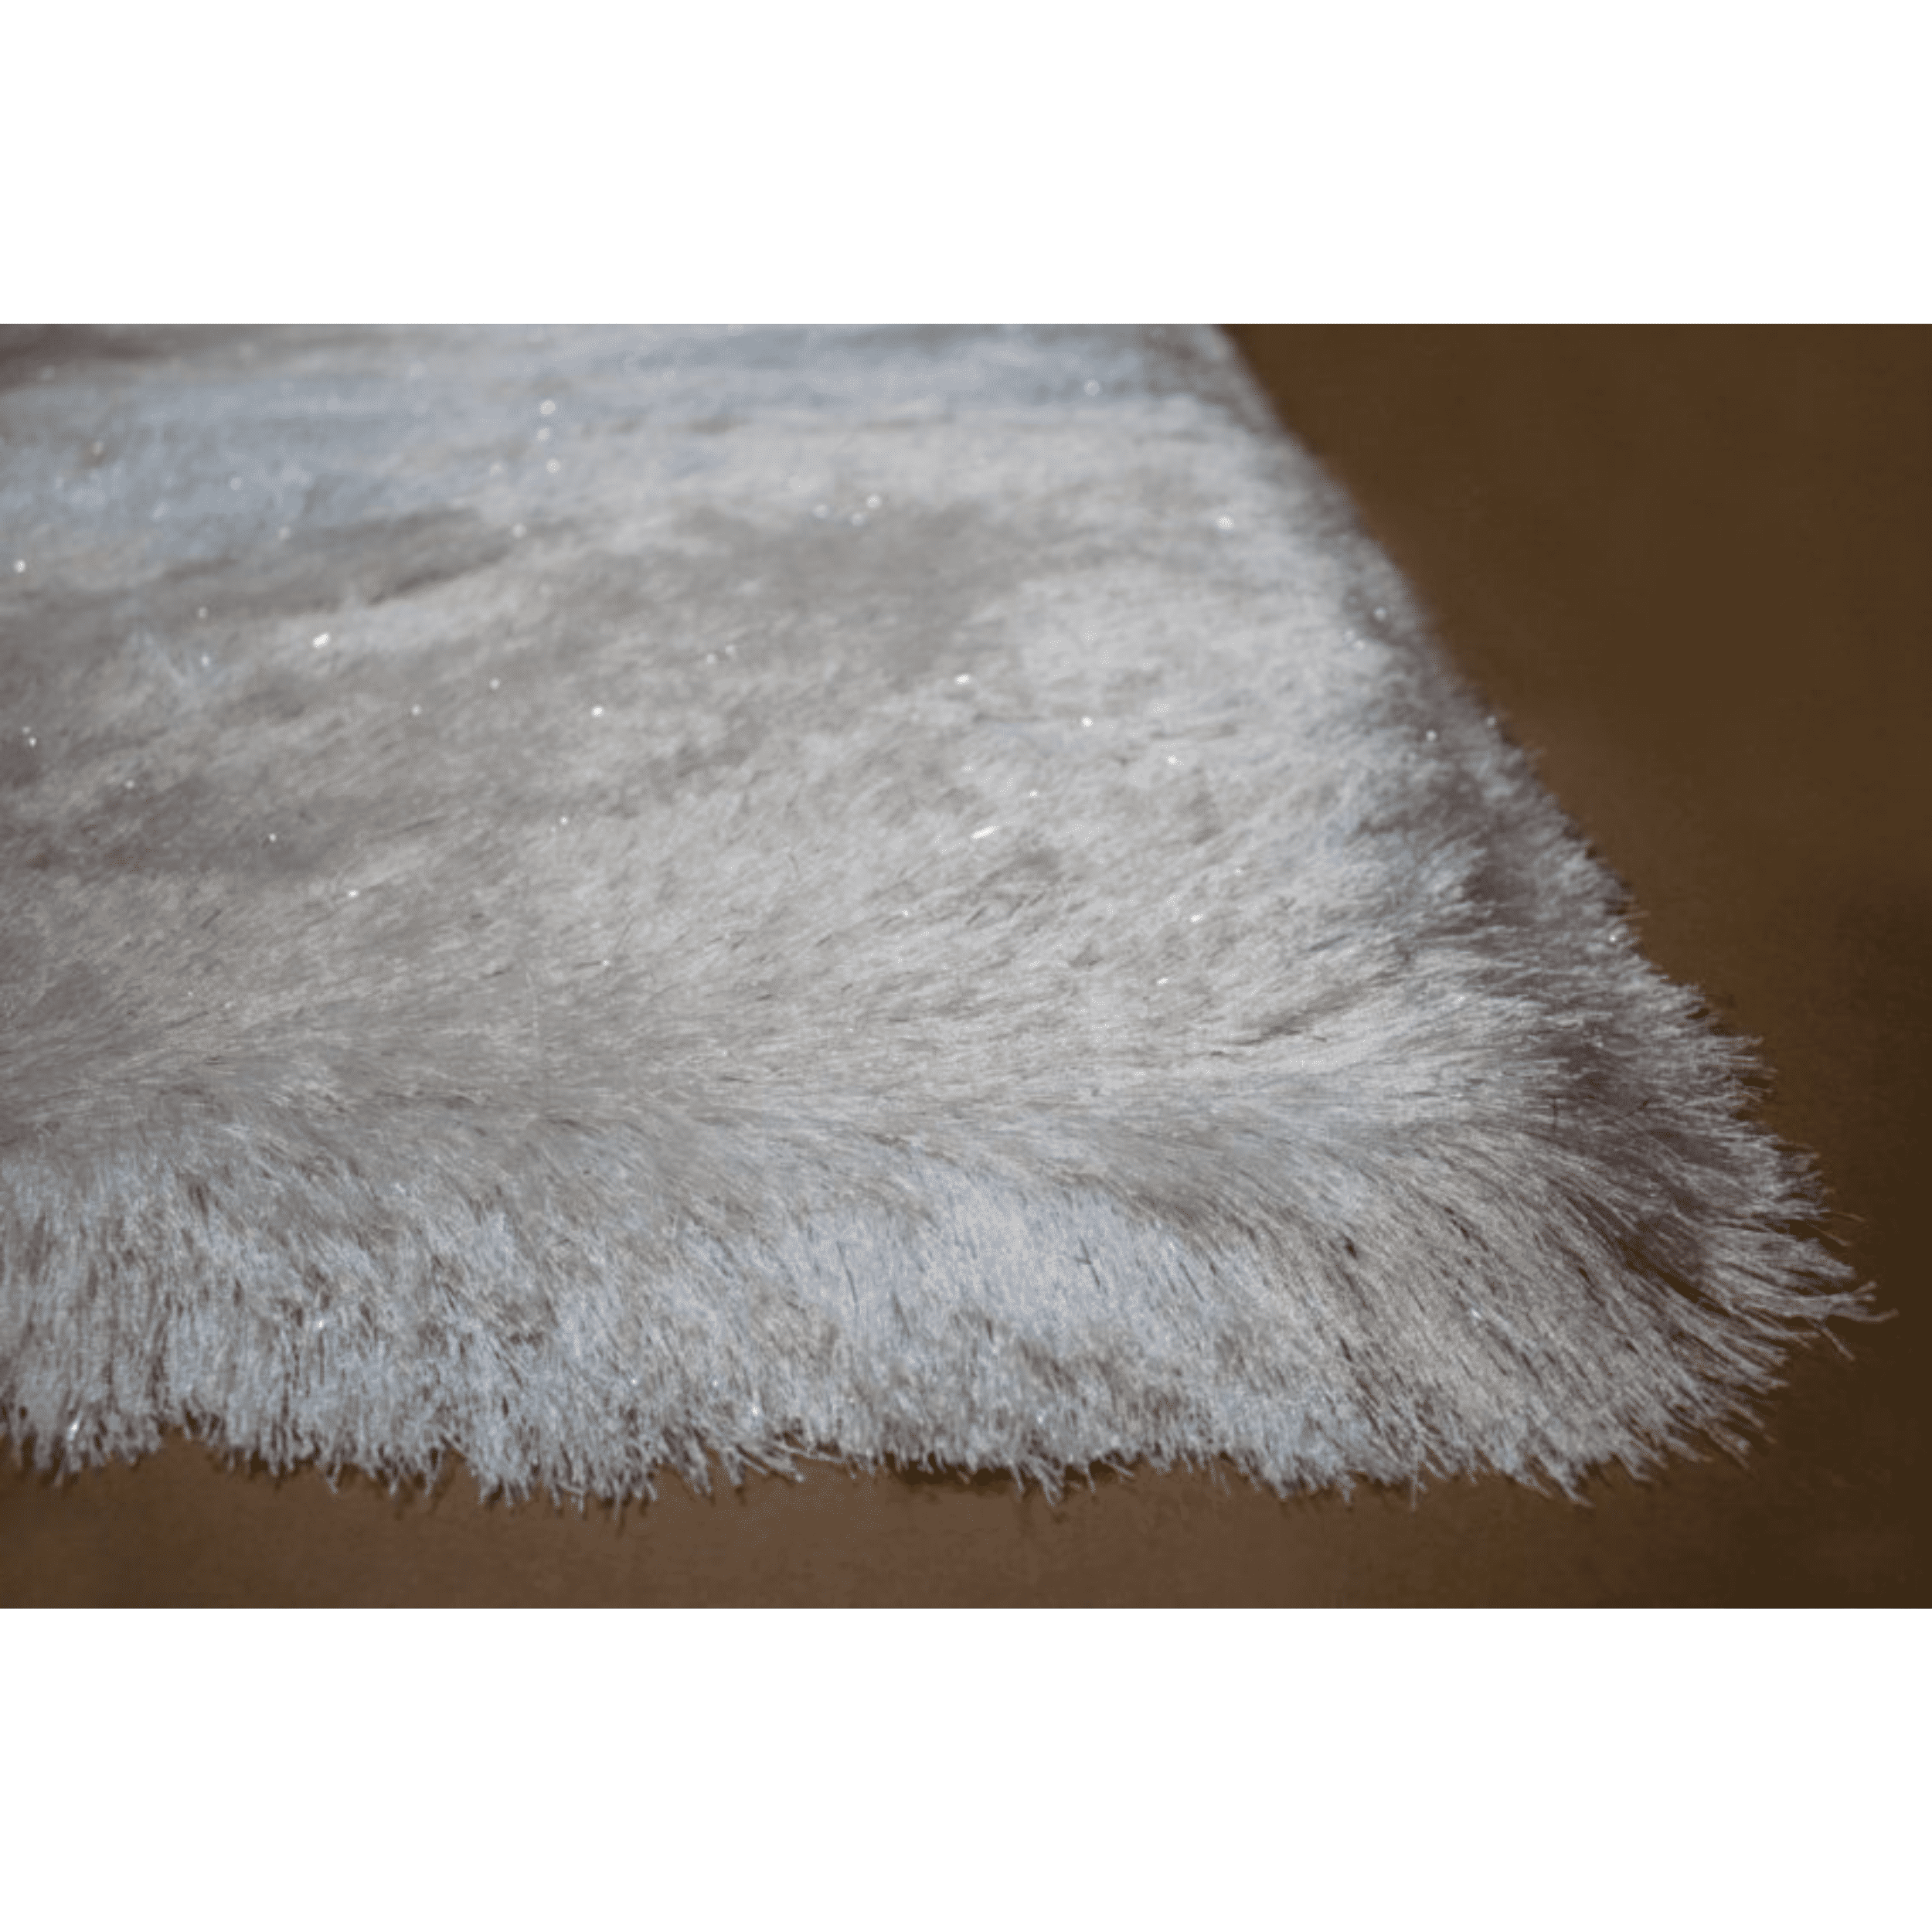 LONG PILE QUALITY THICK SPARKLE SILKY SHINY SHIMMER SOFT SHAGGY charcoal  RUG 